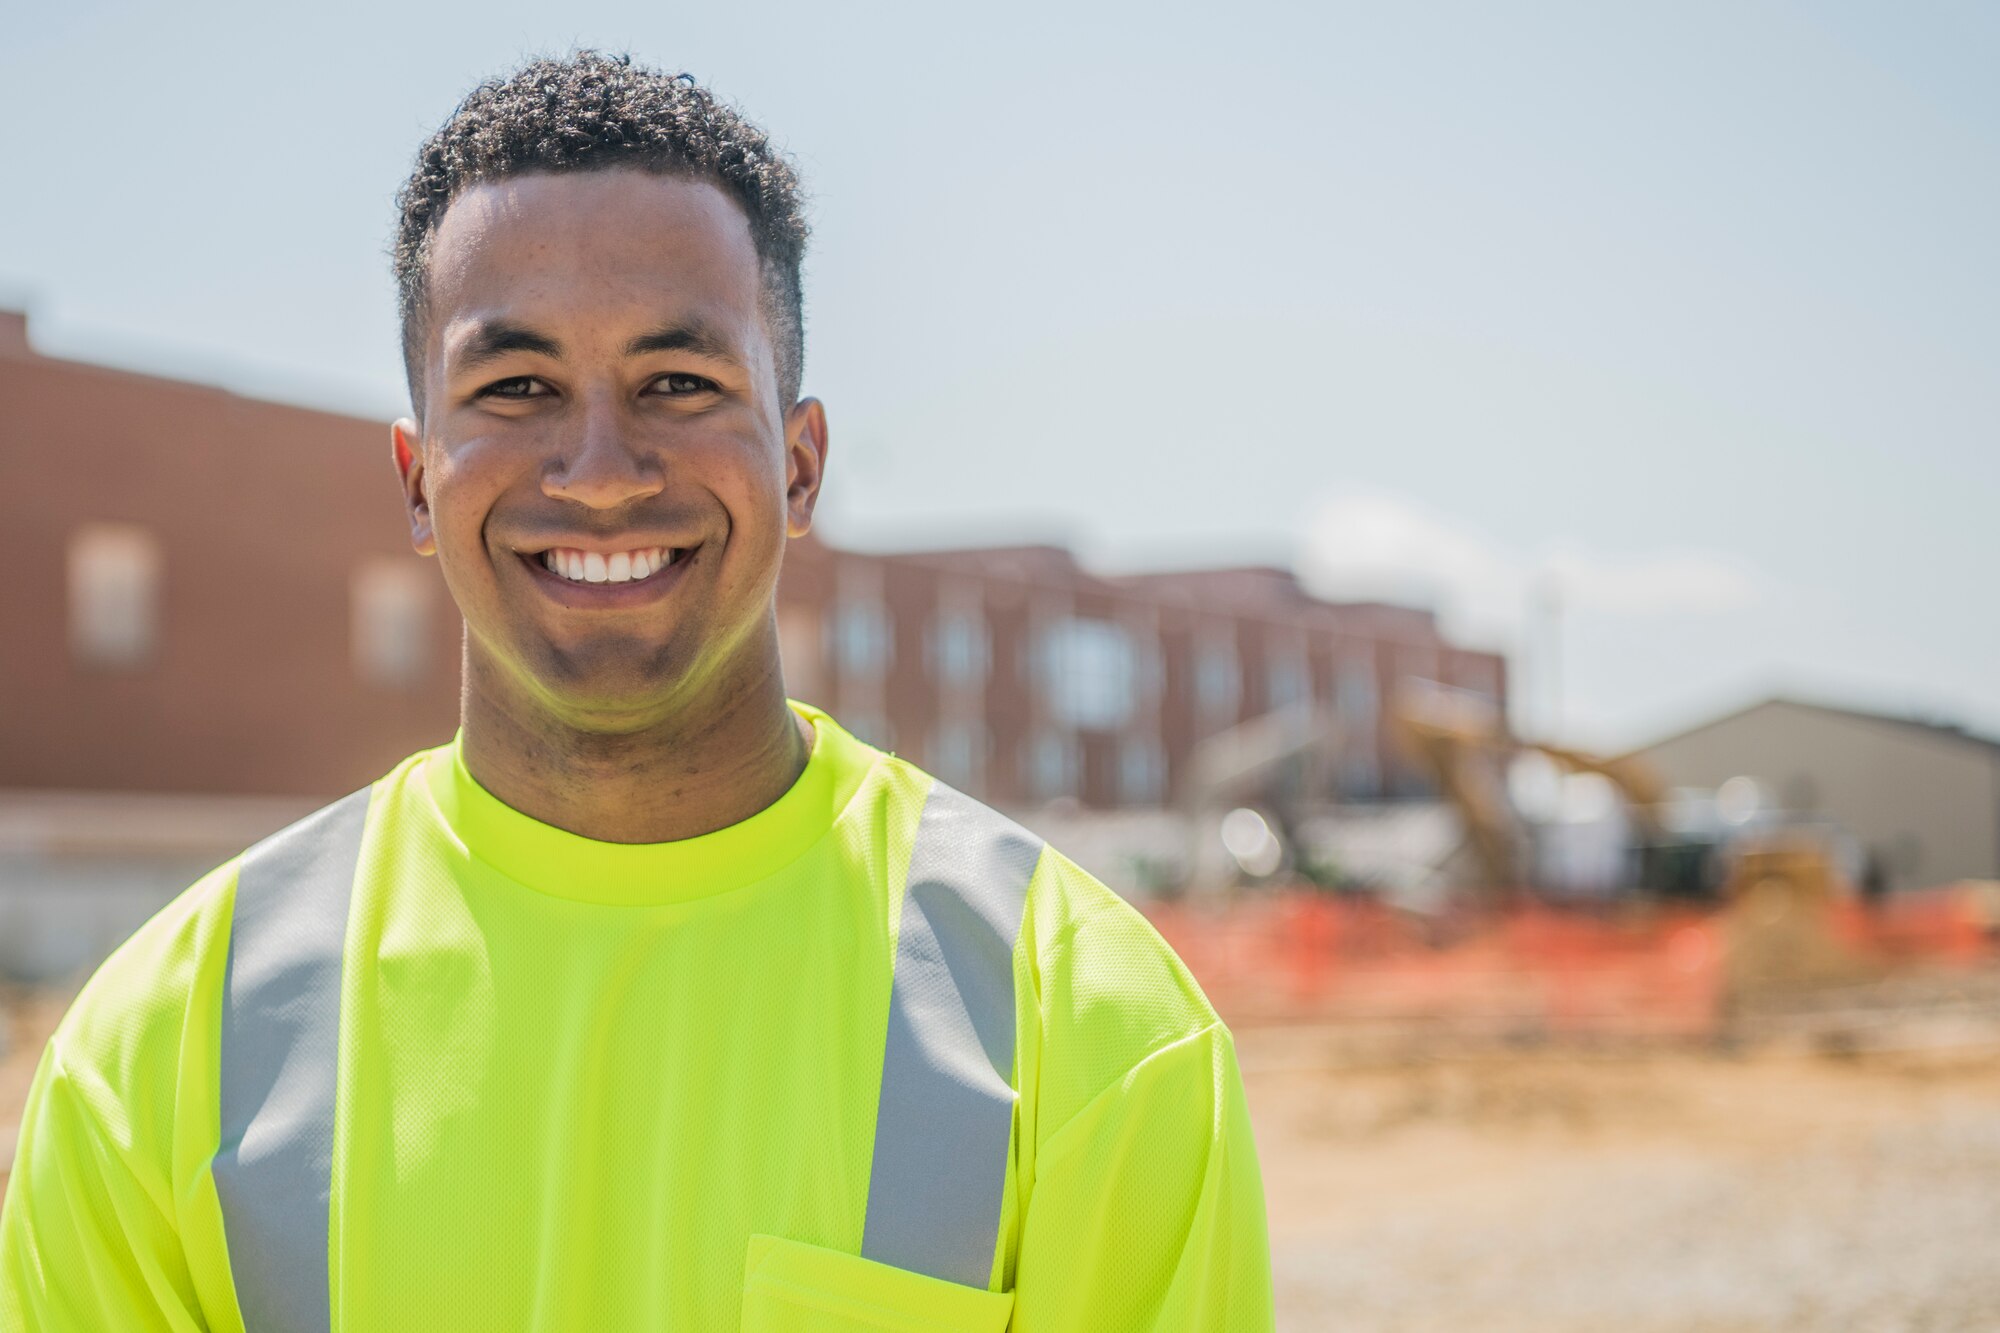 A man wearing a bright colored construction vest smiles for a photo